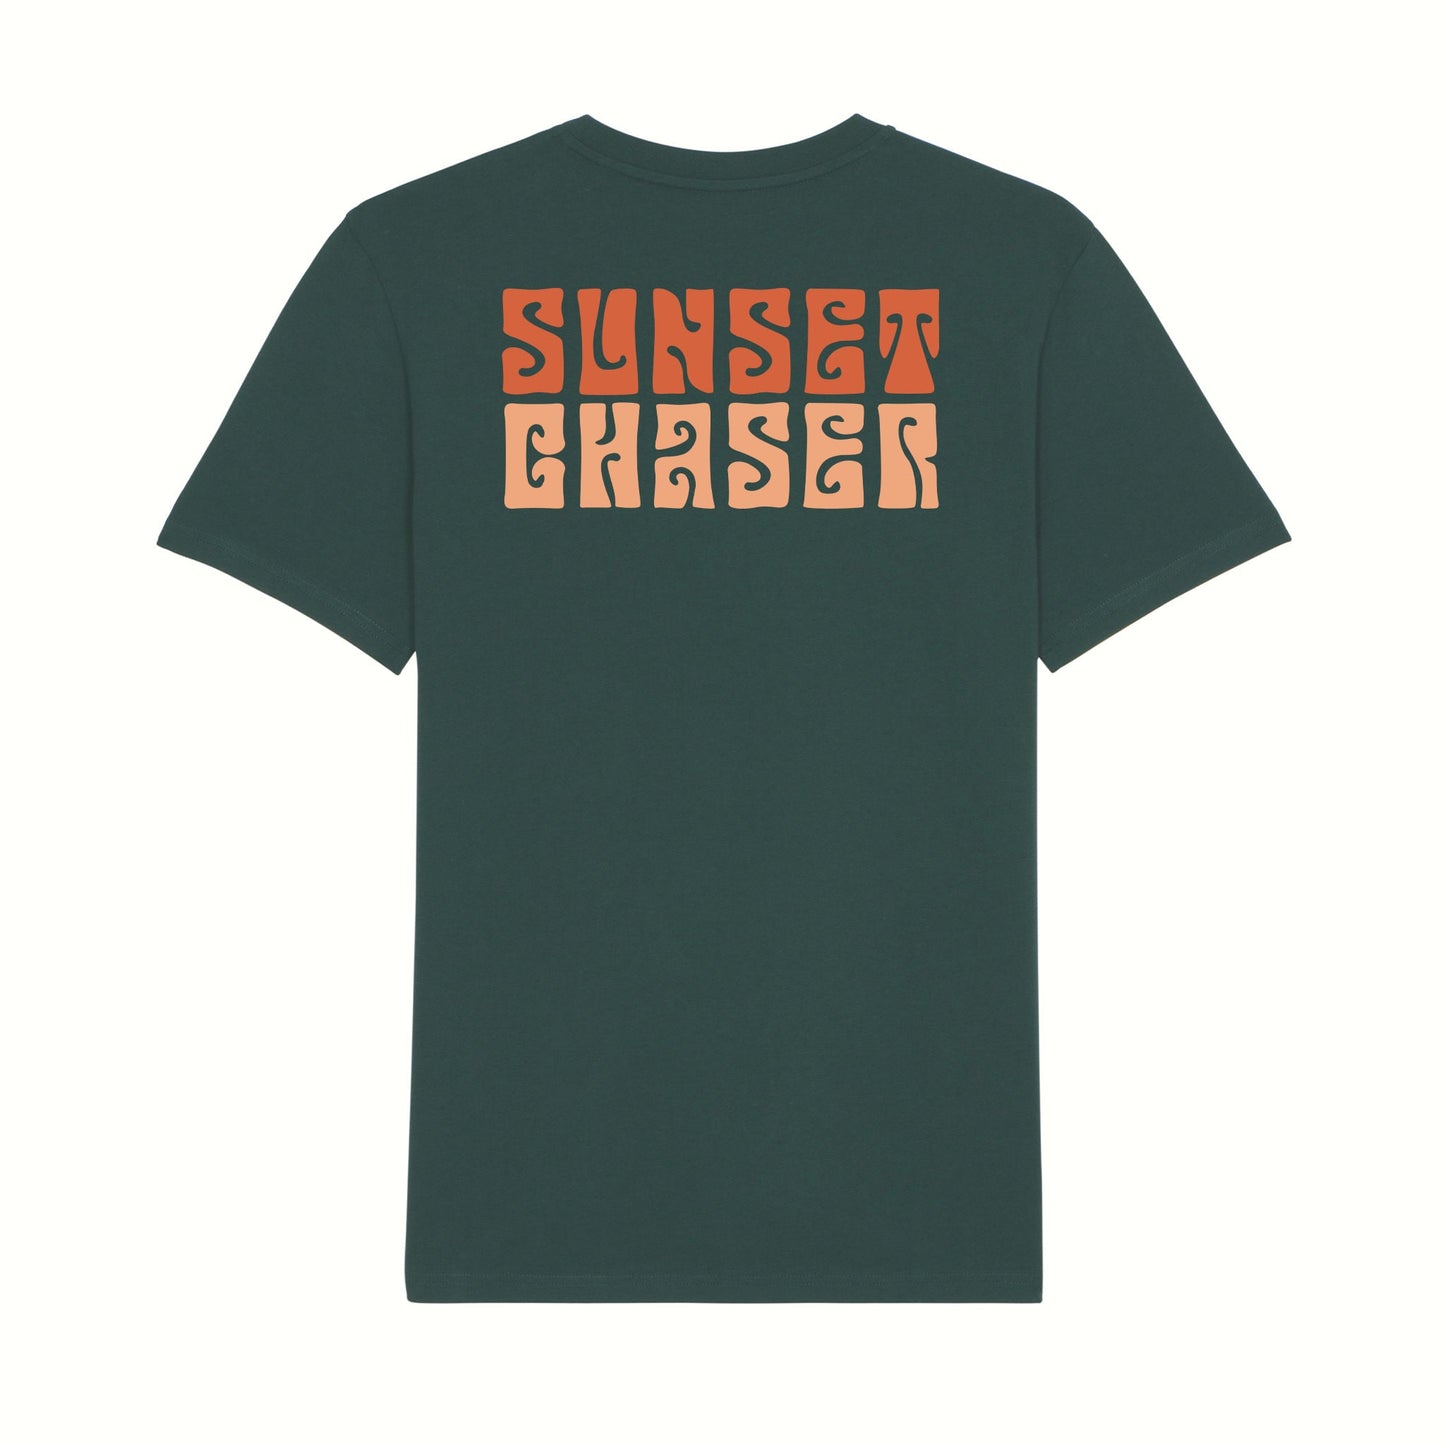 Fear The Ordinary dark green premium organic cotton t-shirt with a Sunset Chaser back print.